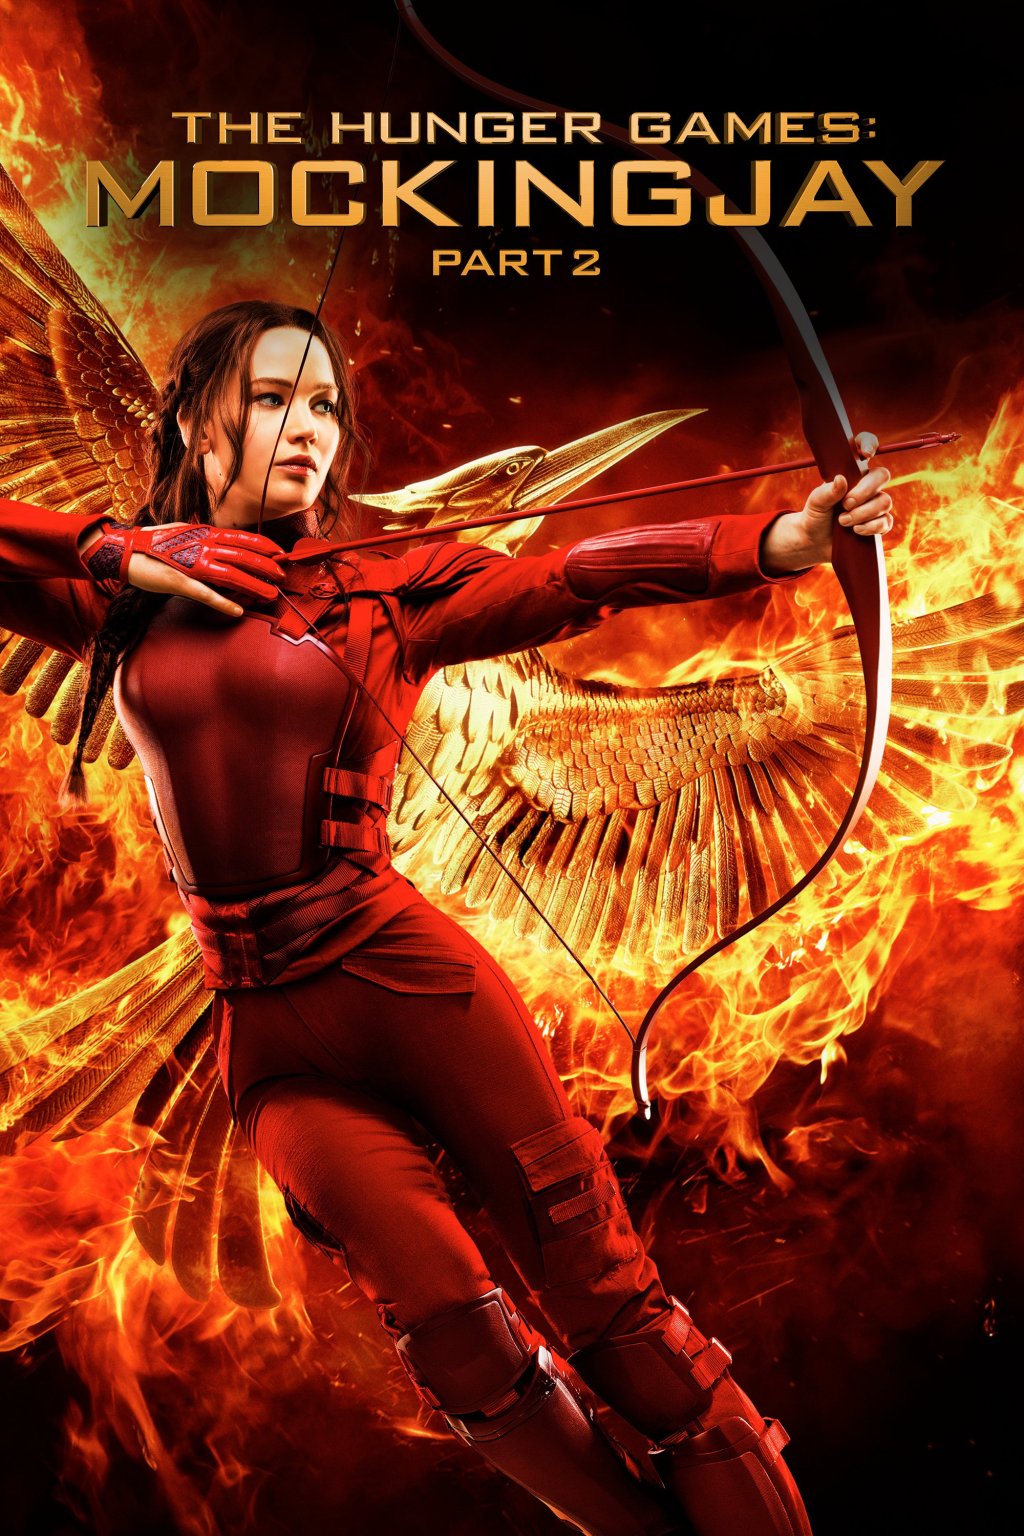 The Hunger Games: Mockingjay – Part 2: Boring, Unintelligent and Underwhelming.